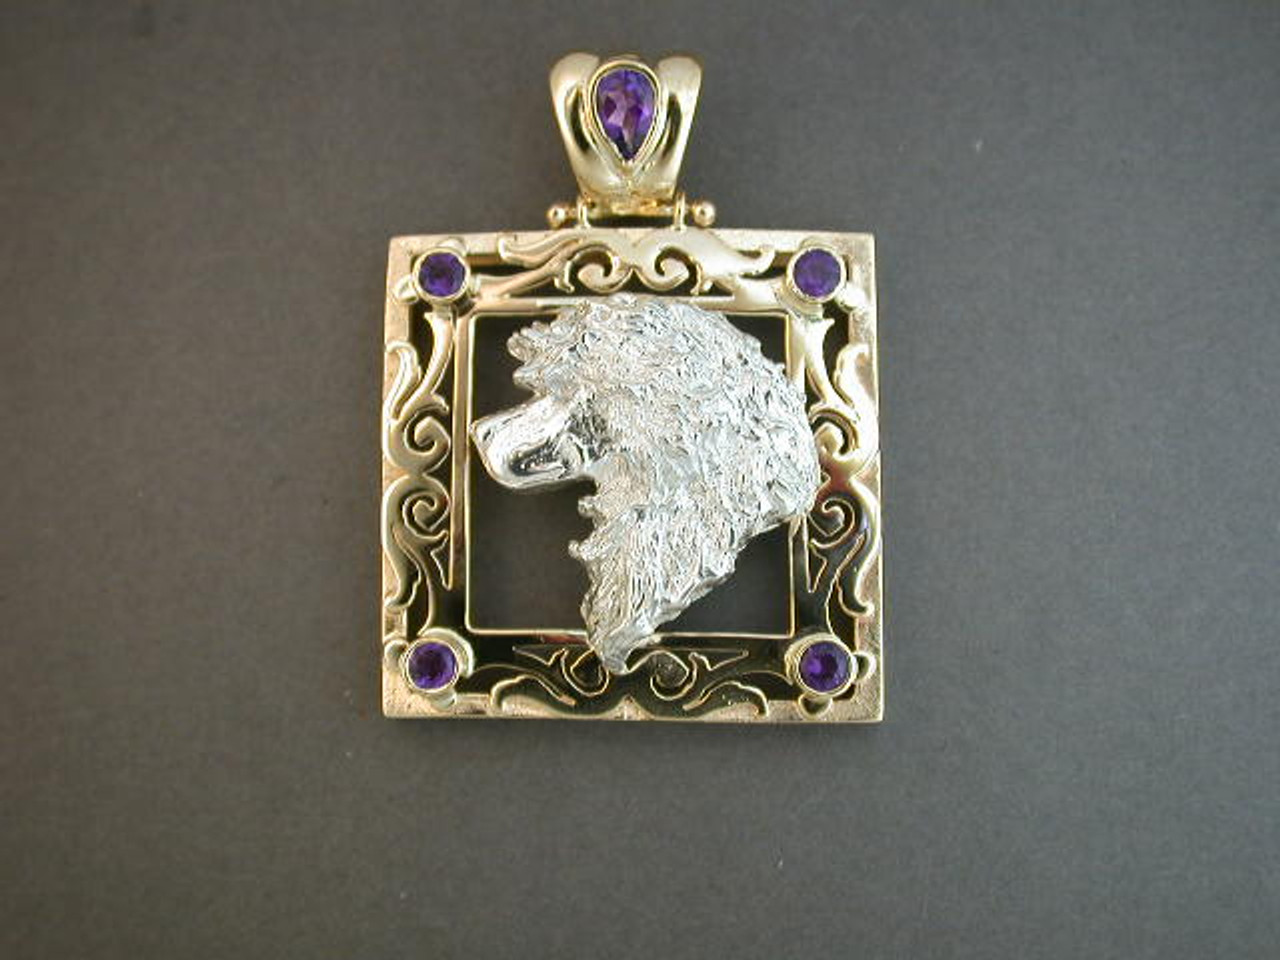 Frame Antique W Ortuguese Water Dog Pendant